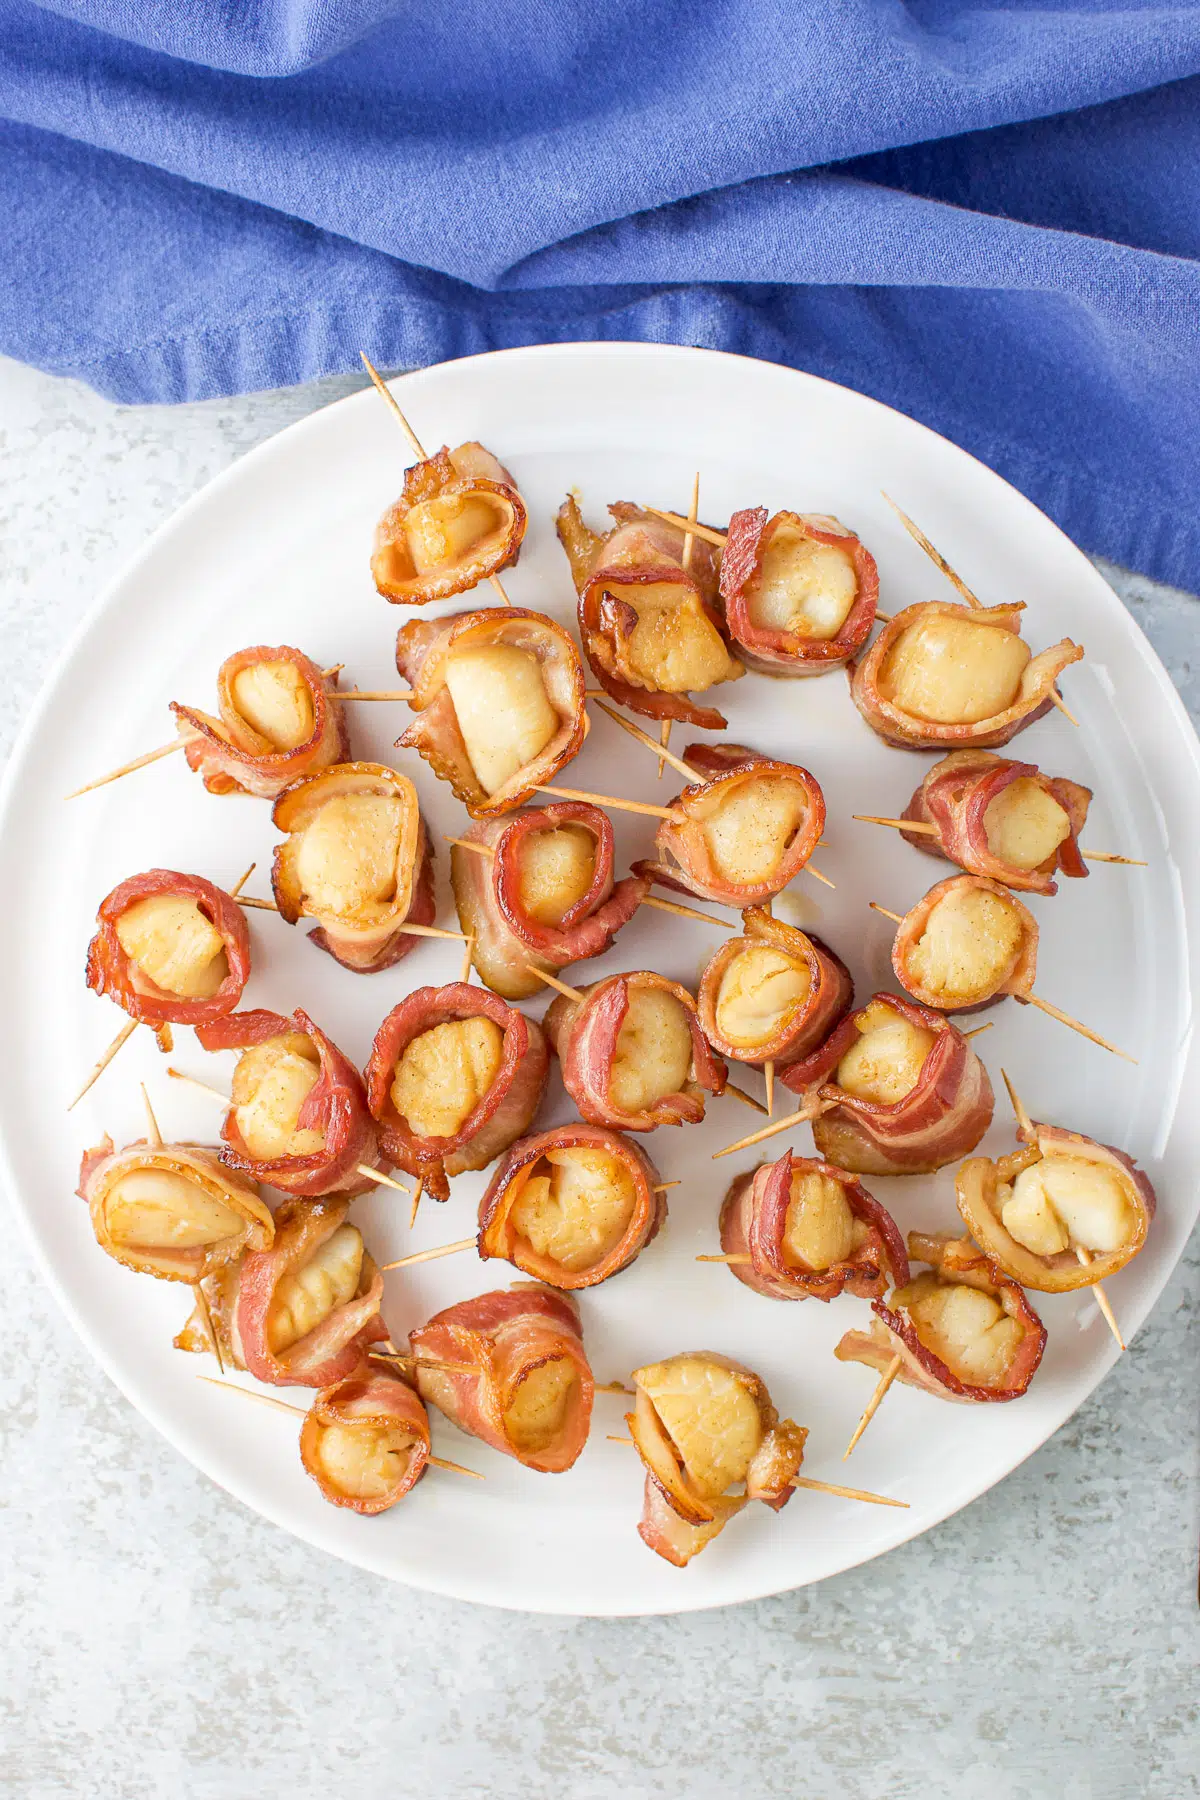 Overhead view of bacon wrapped around scallops on a white plate